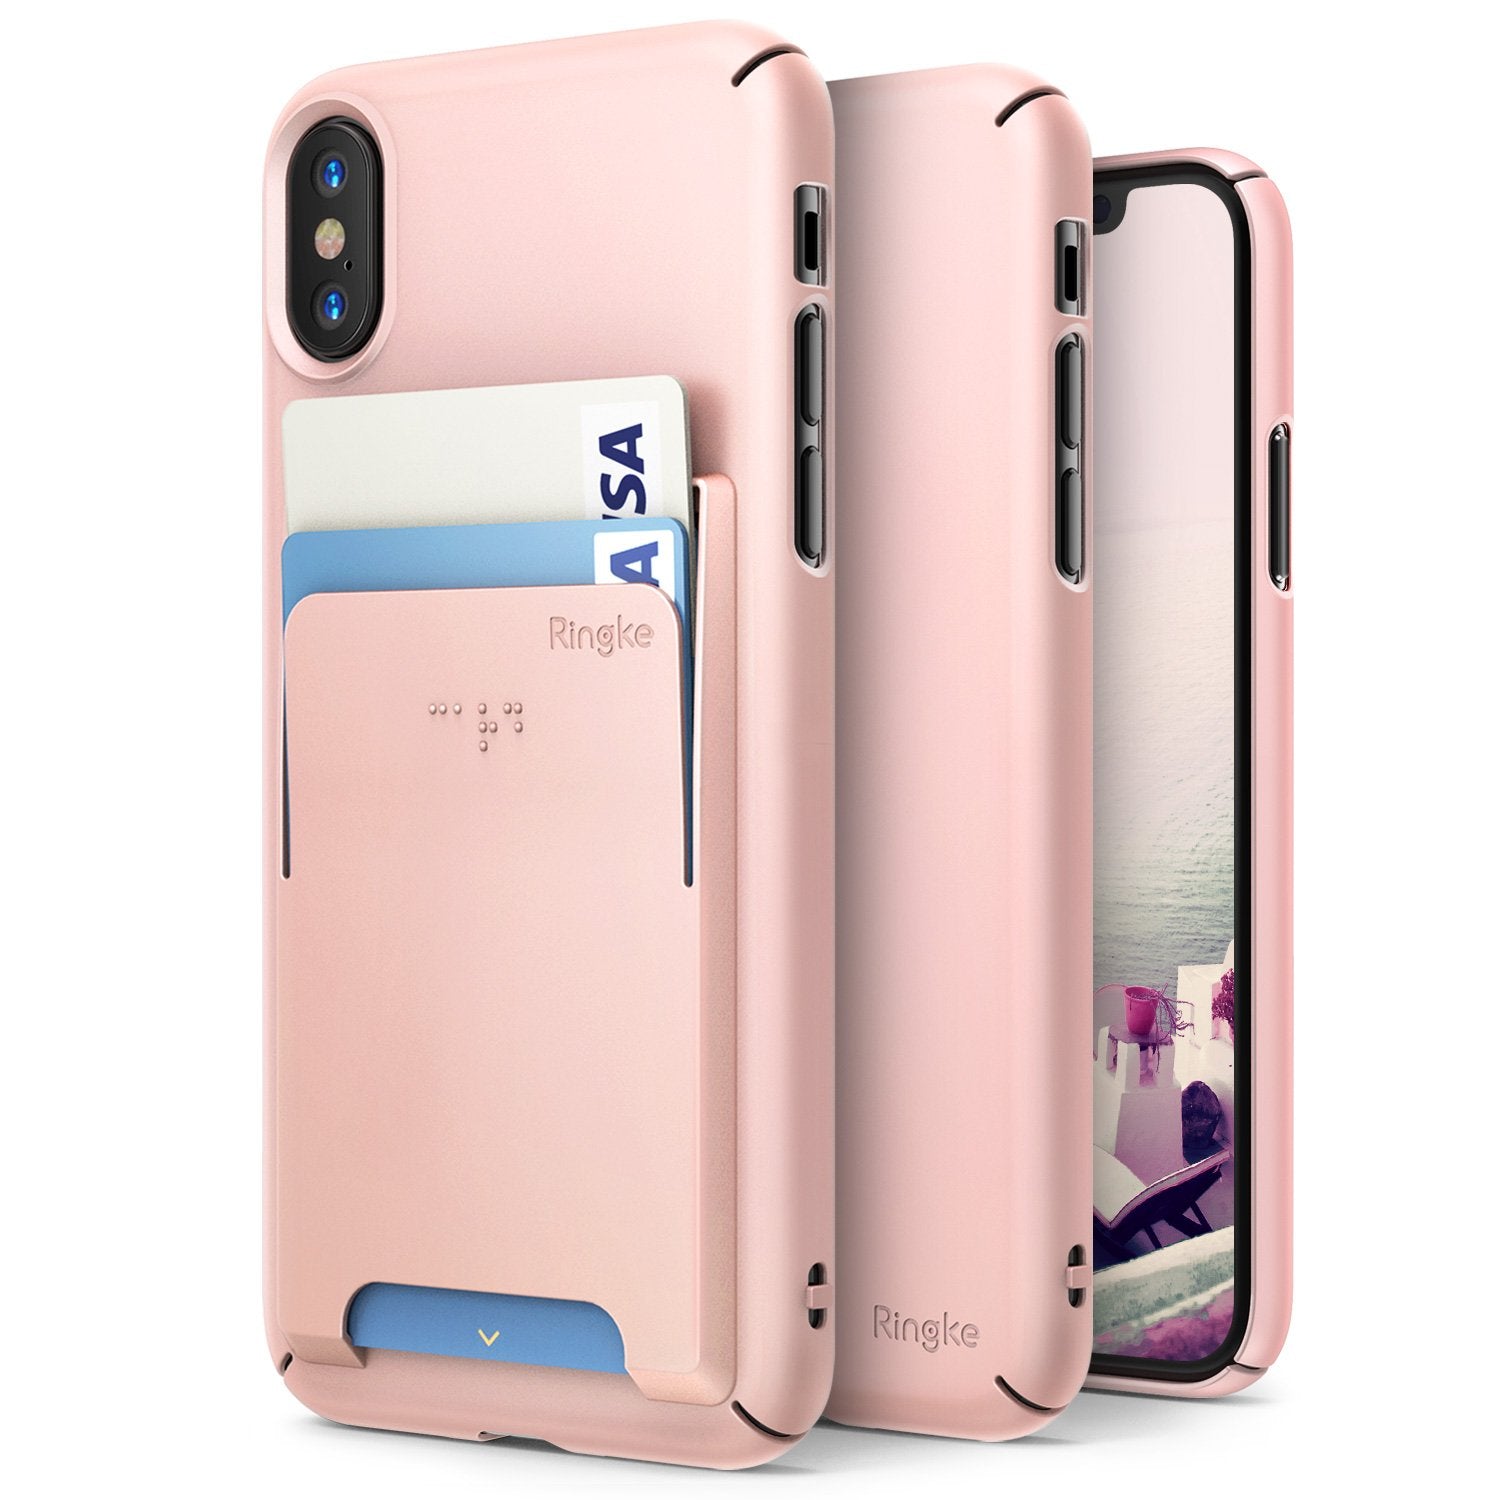 ringke slim slot for iphone x case cover main peach pink